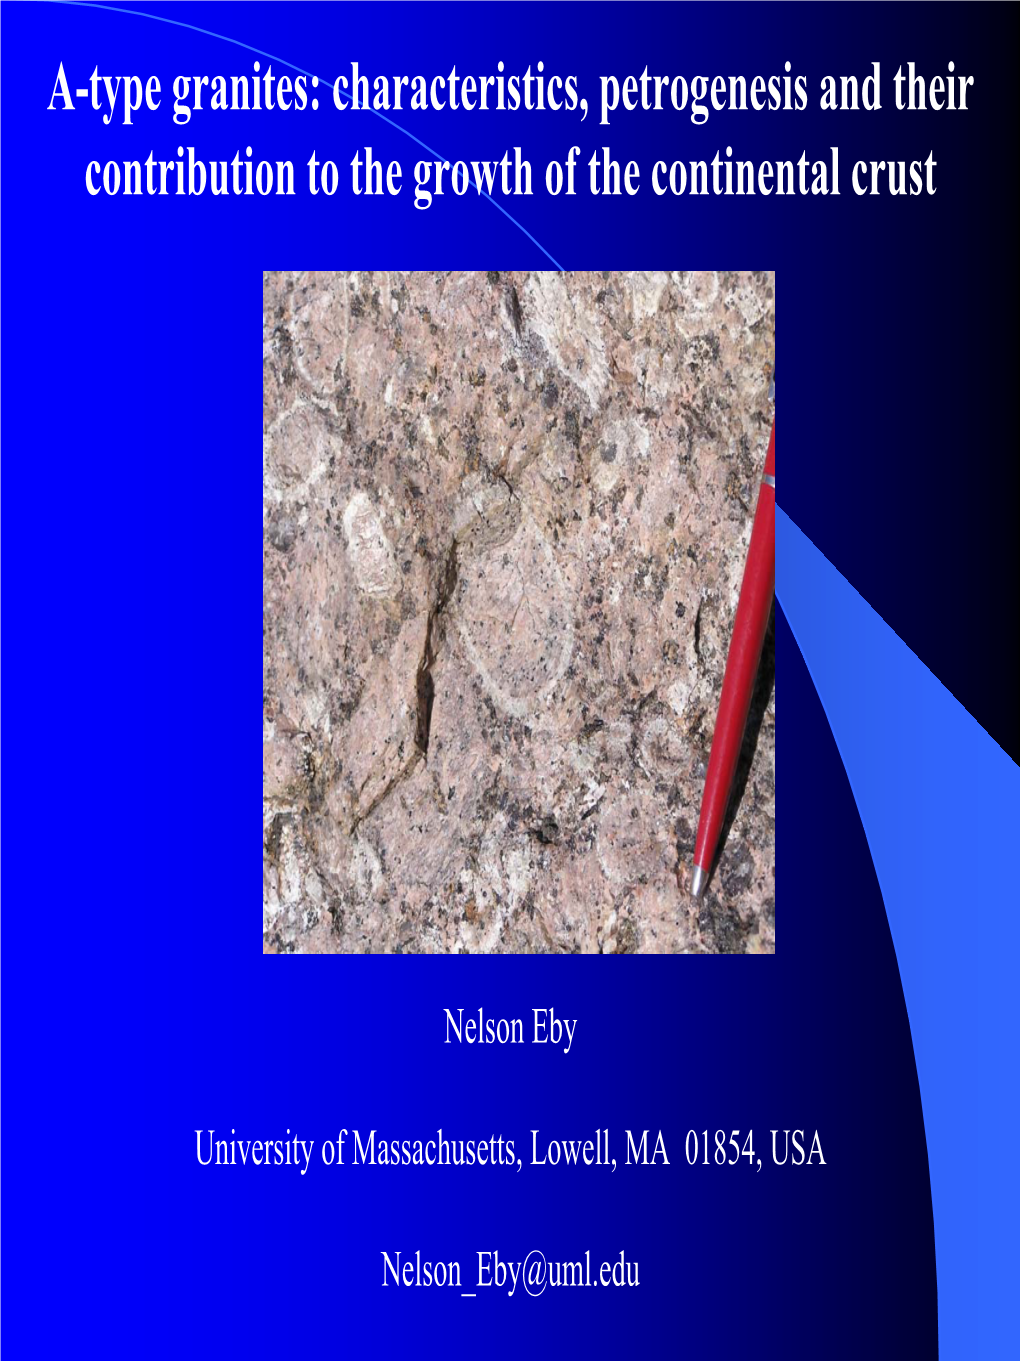 A-Type Granites: Characteristics, Petrogenesis and Their Contribution to the Growth of the Continental Crust